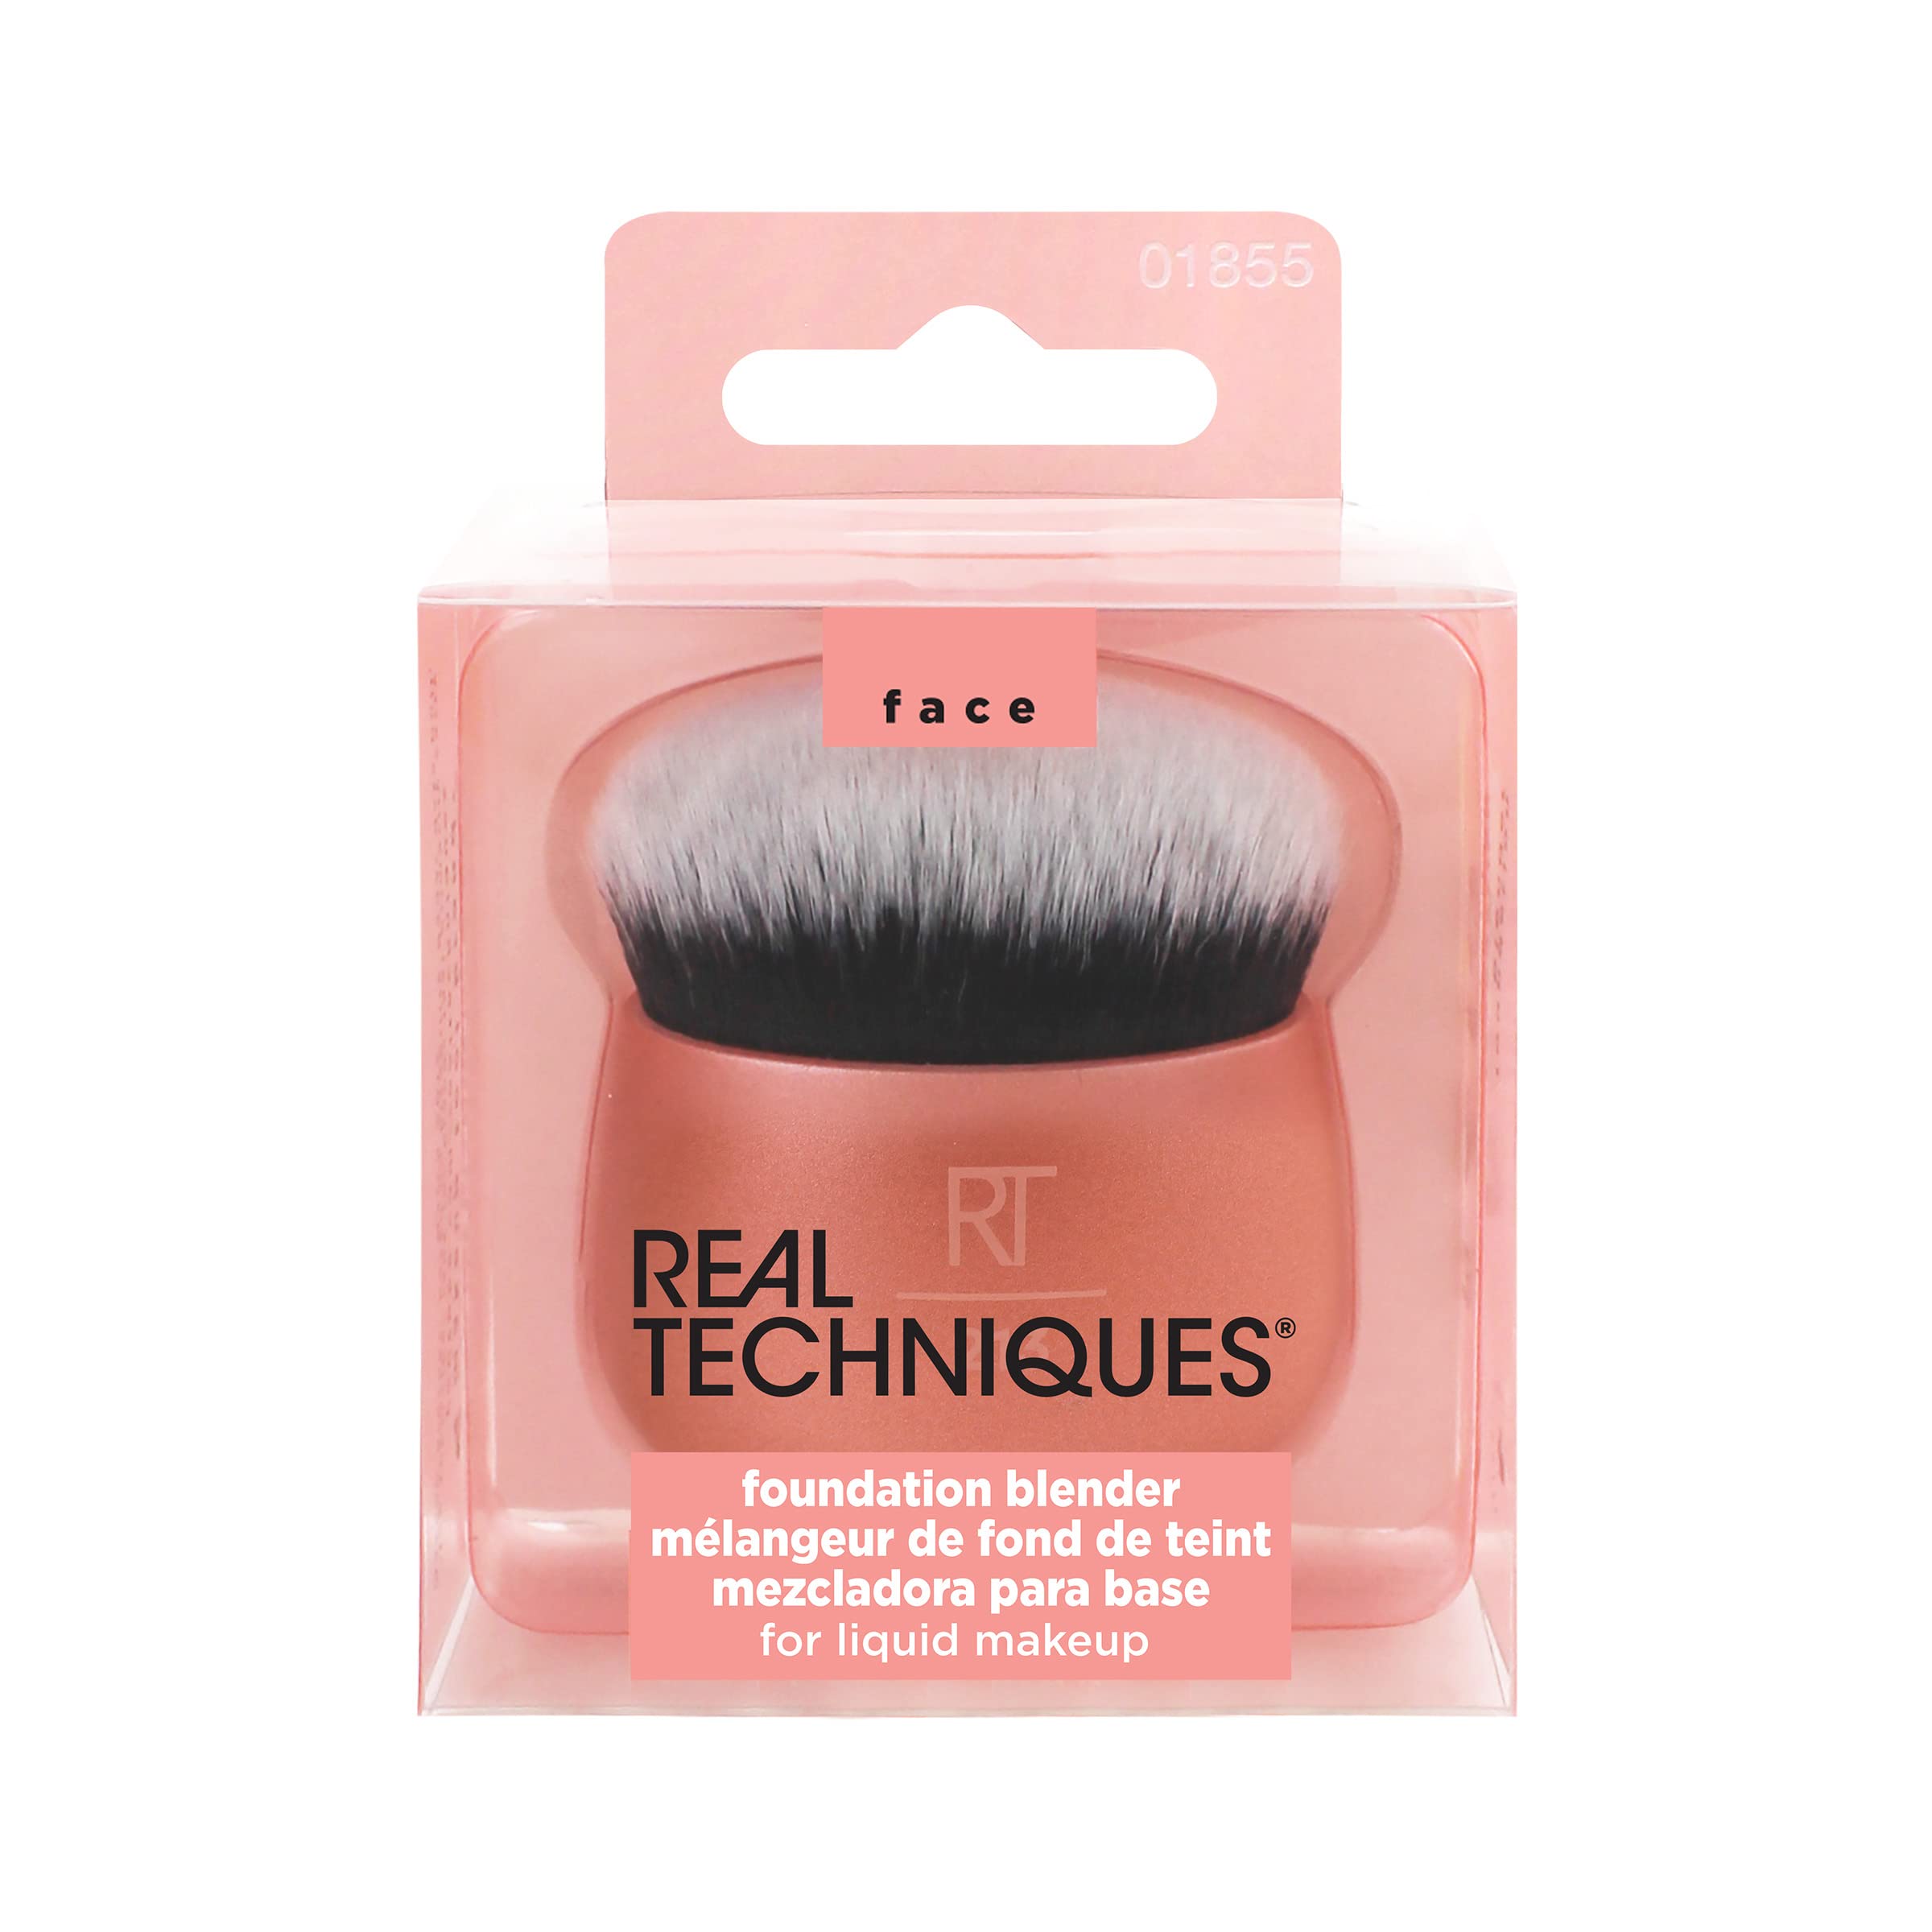 Real Techniques Foundation Makeup Blender, Kabuki Brush For Face or Body Makeup, Works With Liquid or Cream Foundation, No Handle, Blend & Buff Makeup, Dense Synthetic Bristles, 1 Count